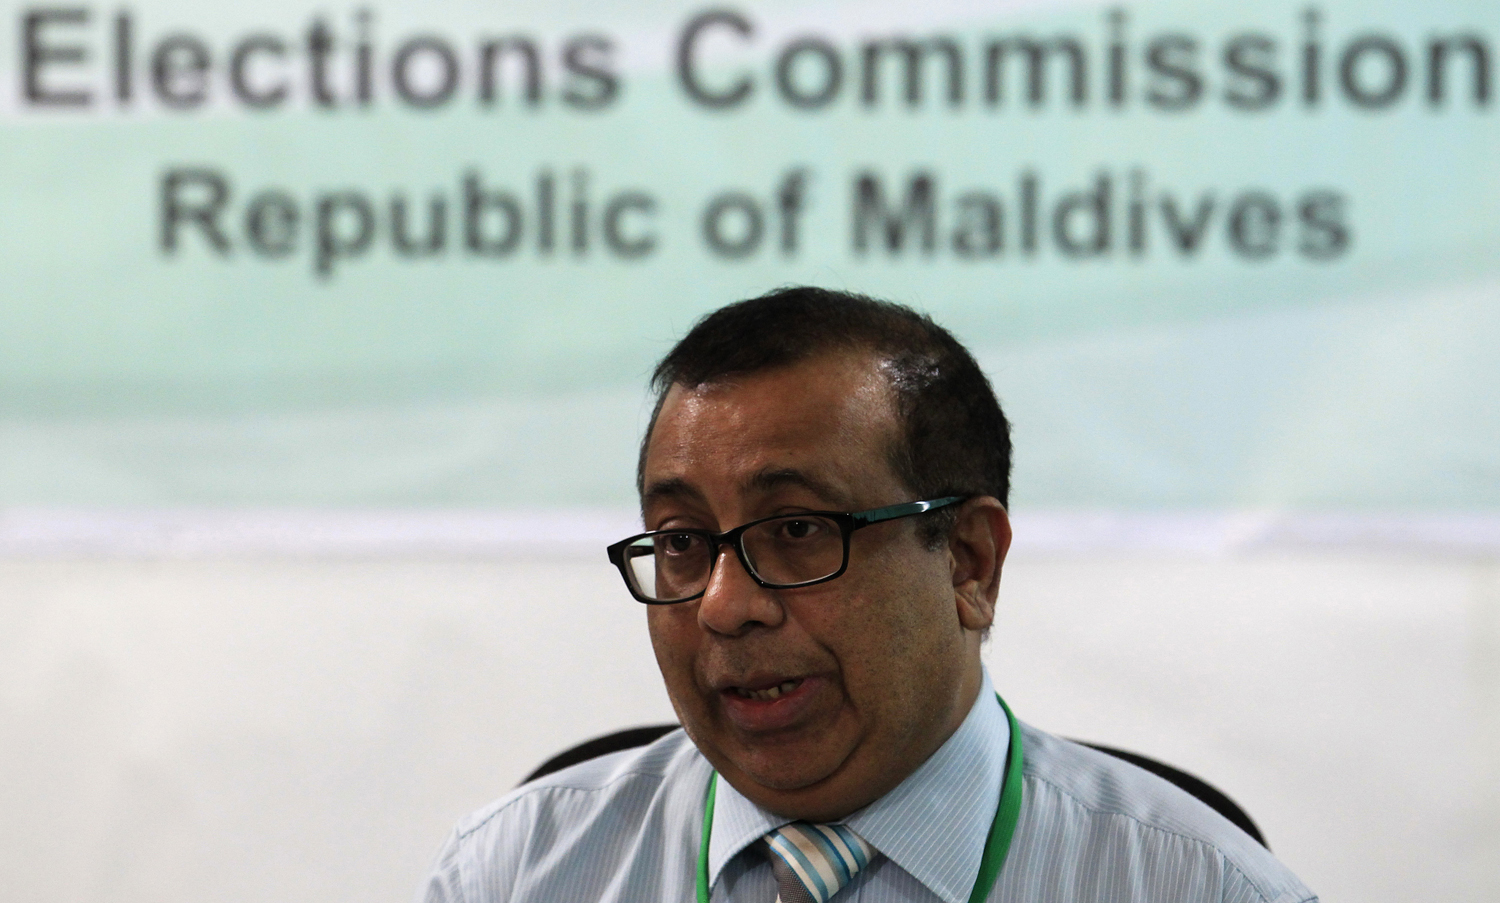 Maldives Election Commissioner Thowfeek speaks during a news conference in Male